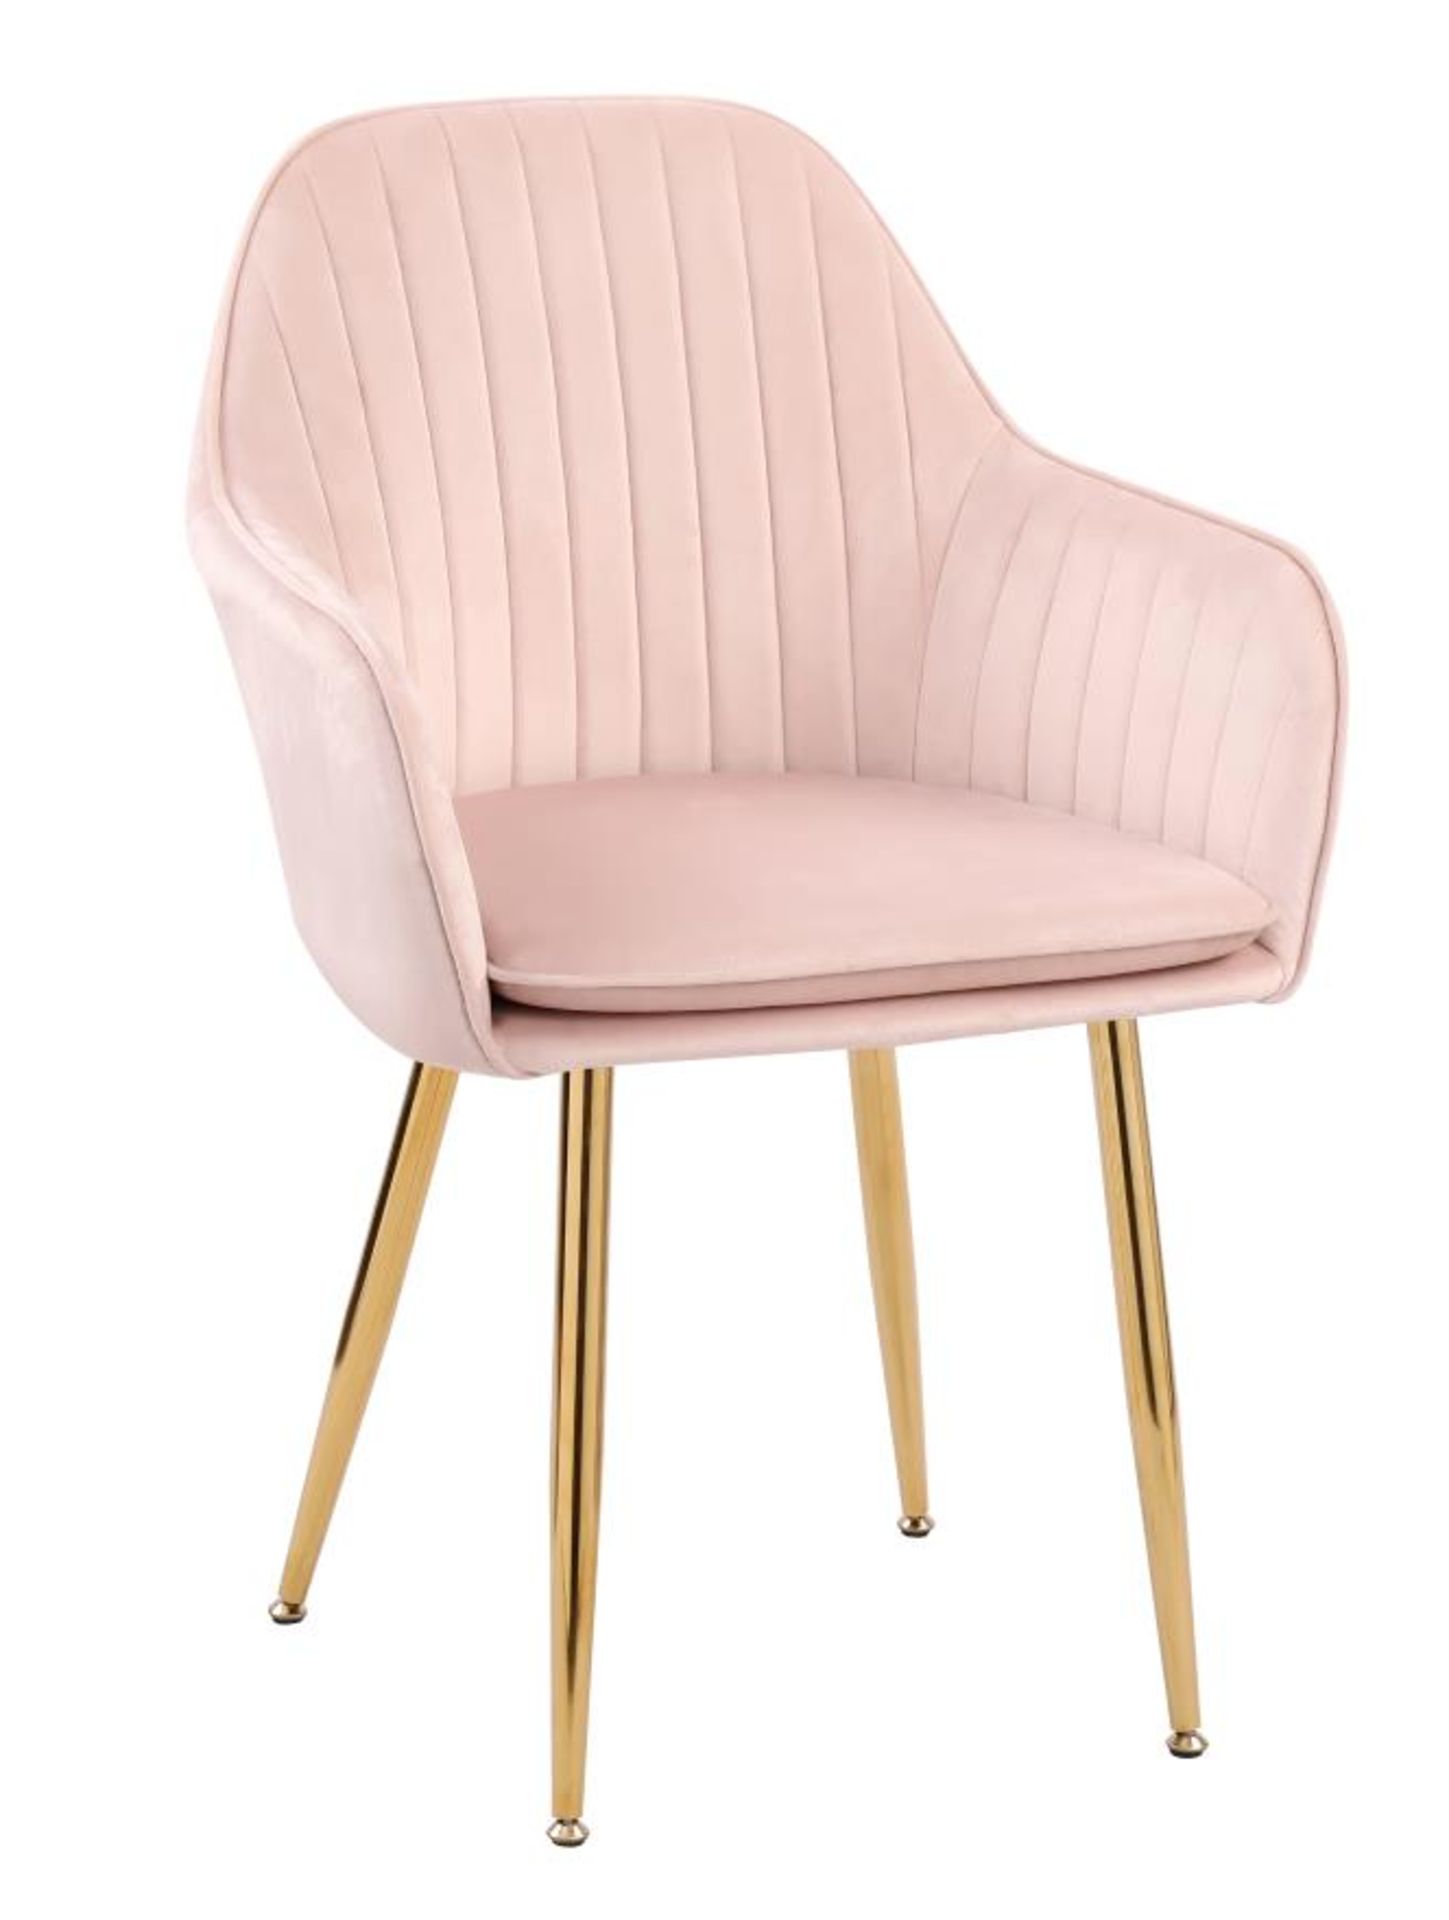 PAIR OF DESIGNER STYLISH PINK DINING CHAIRS - VELVET SEAT CUSHION GOLD LEGS RRP £249 - Image 2 of 2